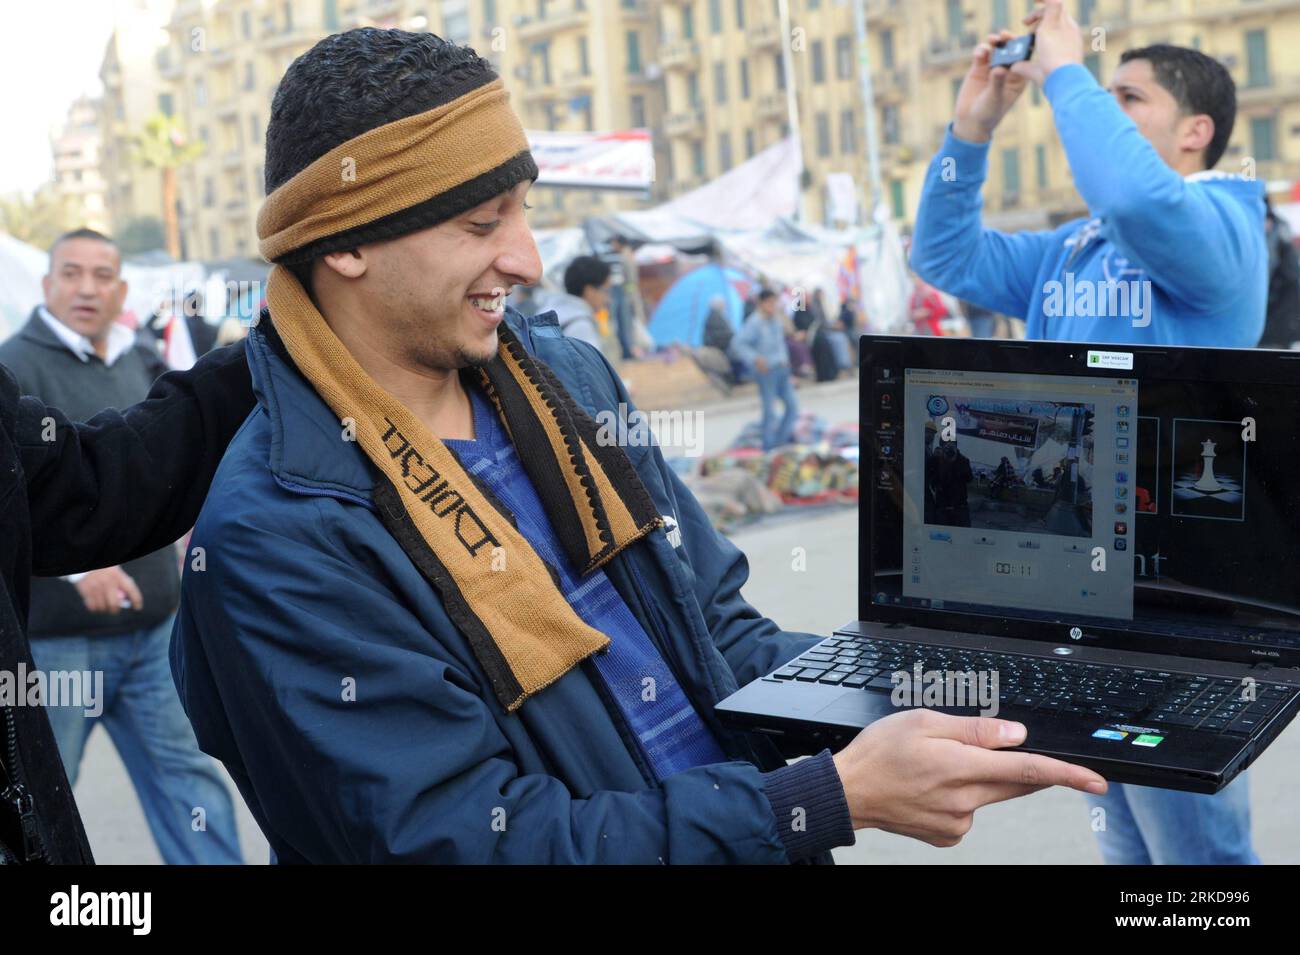 Bildnummer: 54890850  Datum: 09.02.2011  Copyright: imago/Xinhua (110209) -- CAIRO, Feb. 9, 2011 (Xinhua) -- A demonstrator utilizes his laptop s cam to film the conditions of the Liberation Square in Cairo, capital of Egypt, on Feb. 9, 2011. The anti-government demonstrations in Egypt have entered the third week. Egyptian Vice President Omar Suleiman said a committee had been formed to amend the Egypt s constitution to allow free and fair elections in September. (Xinhua/Jin Liangkuai) (lr) EGYPT-CAIRO-LIBERATION SQUARE-LIFE PUBLICATIONxNOTxINxCHN Gesellschaft Politik Aufstand Revolte Unruhen Stock Photo